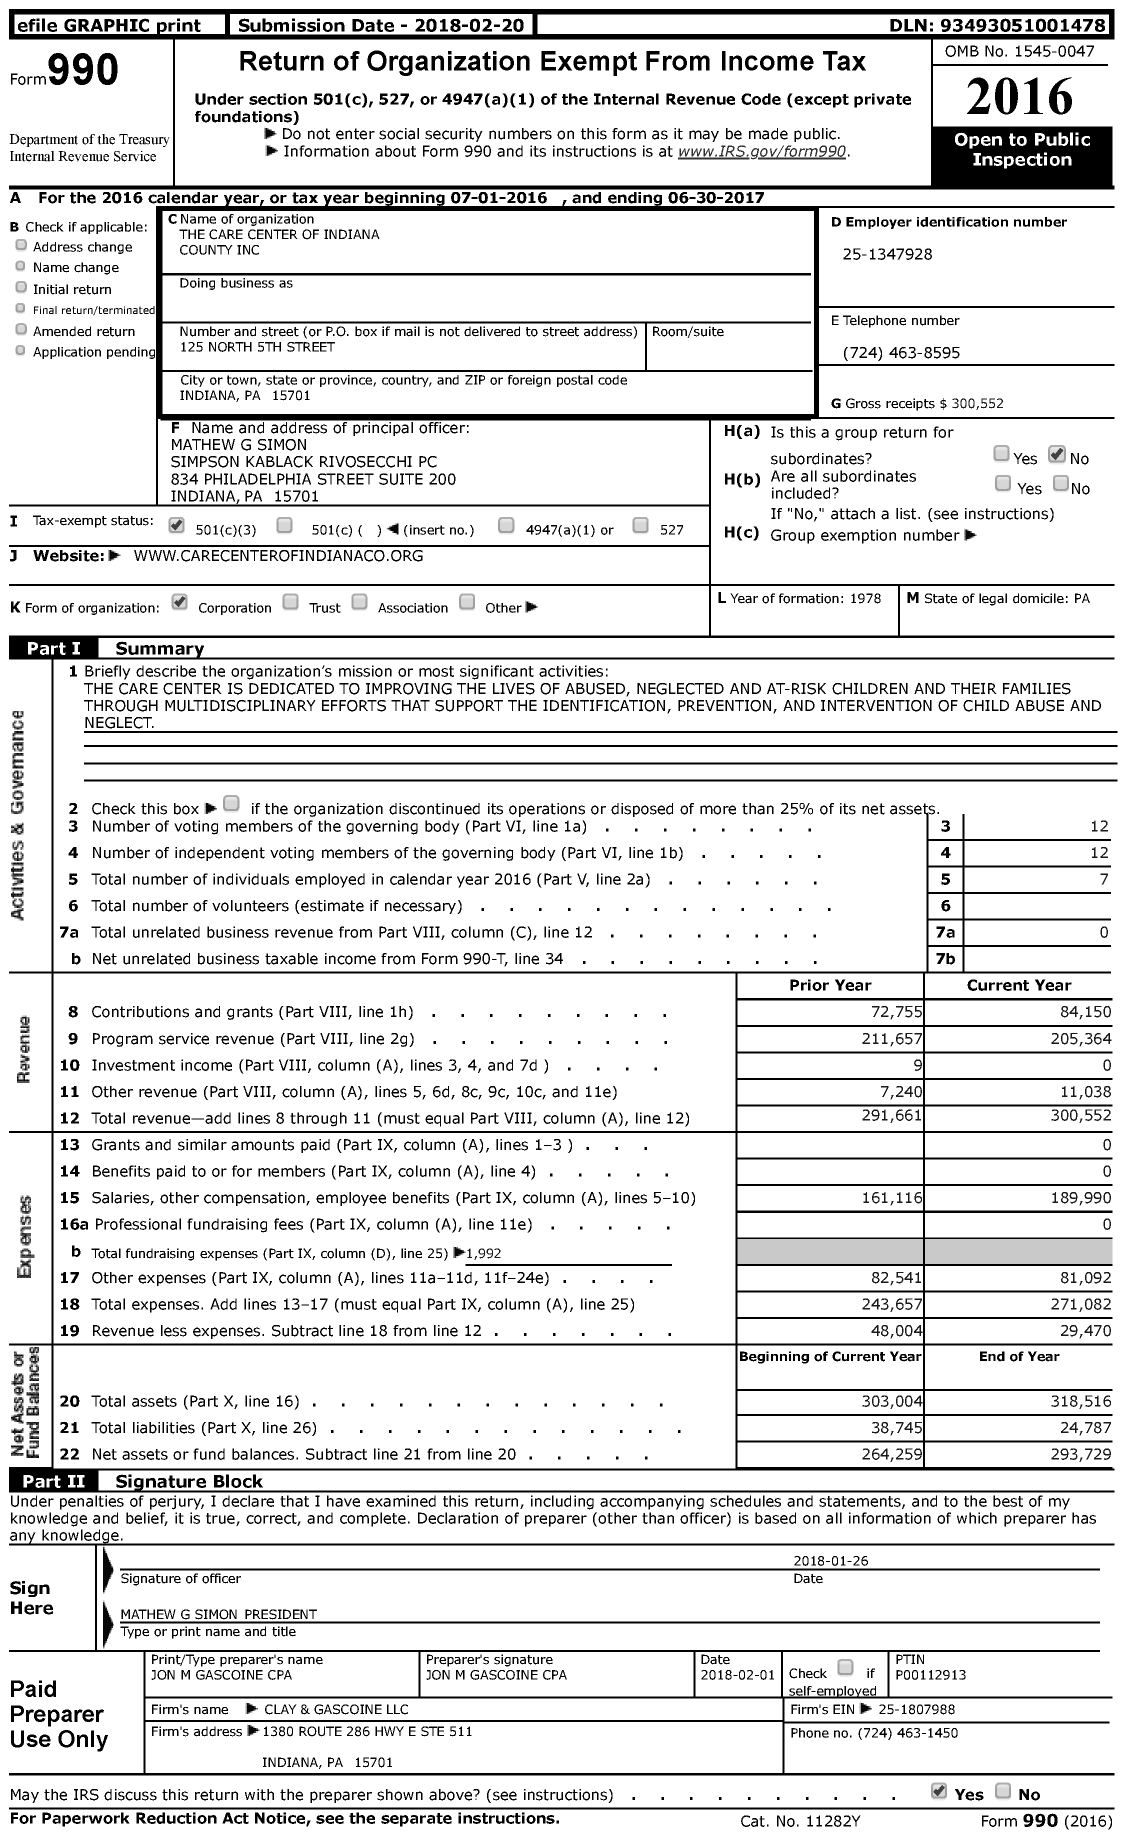 Image of first page of 2016 Form 990 for The Care Center of Indiana County